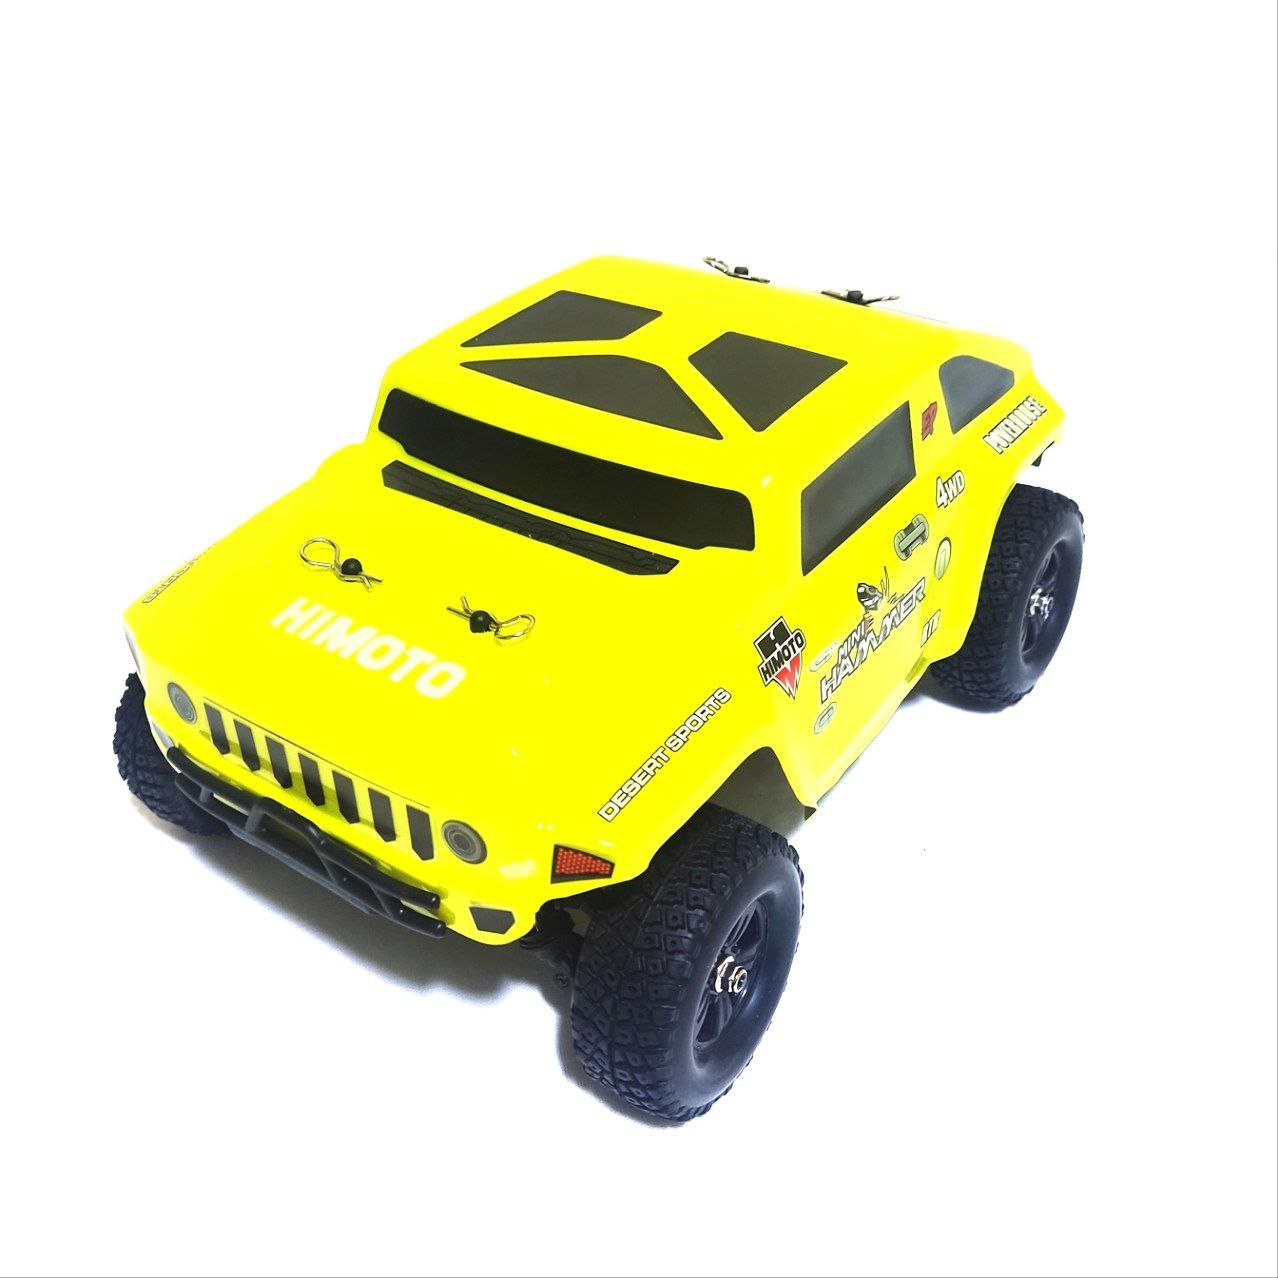 Радиоуправляемый монстр Himoto Hammer Brushless 4WD RTR масштаб 1:18 24G - E18HML/28700Y shdiatool 1piece adapter 5 8 11 male thread to 3 8 hexagon shank 5 8 11 drill core bits grinding disc hole saw fitted hammer